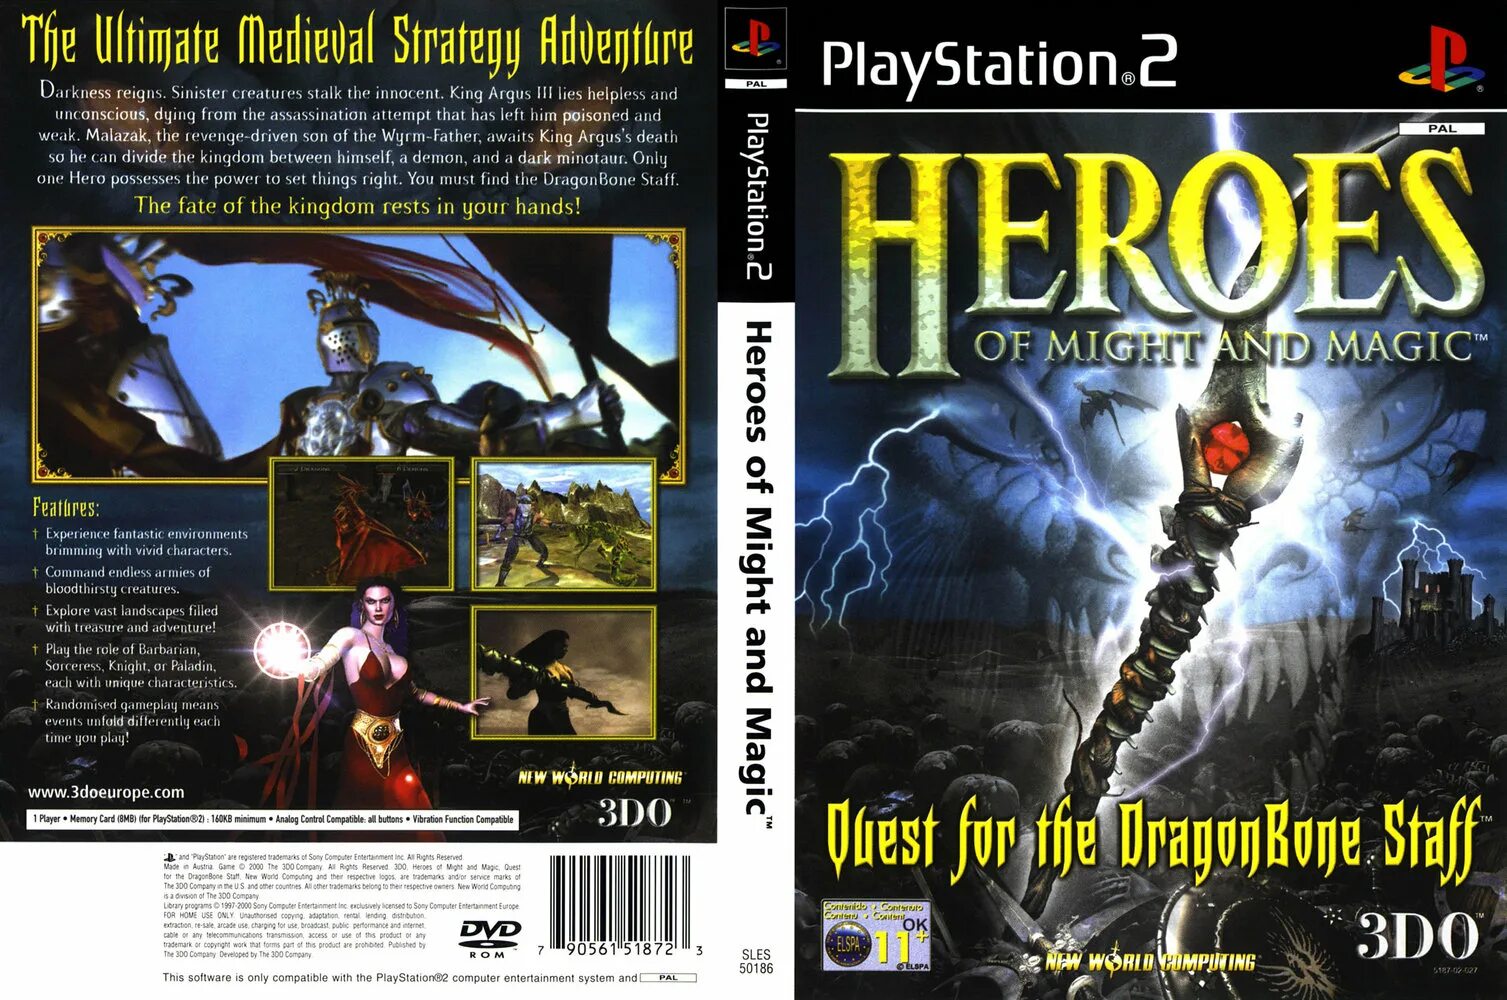 Might and Magic ps2. Heroes of might and Magic: Quest for the Dragon Bone staff ps2. Heroes of might and Magic 3 ps2. Heroes of might and Magic Quest for the Dragonbone staff. Герои меча и магии список героев